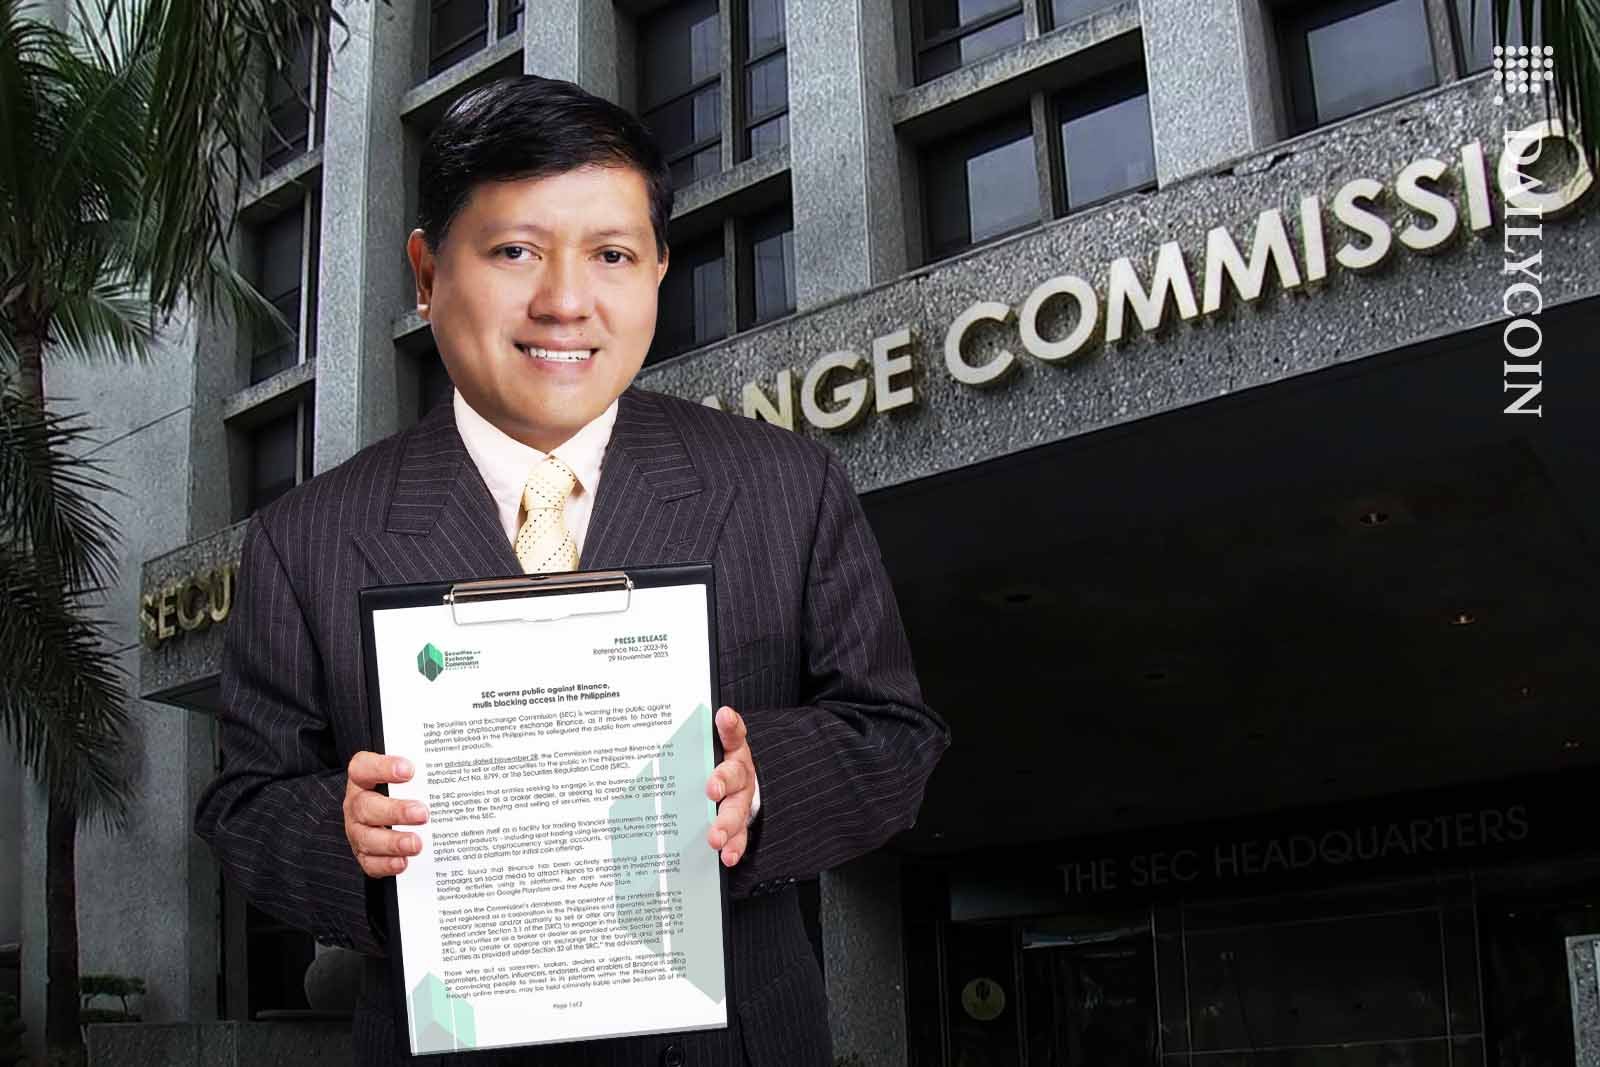 Chairman Emilio Benito Aquino holding up a document infront of the SEC building.